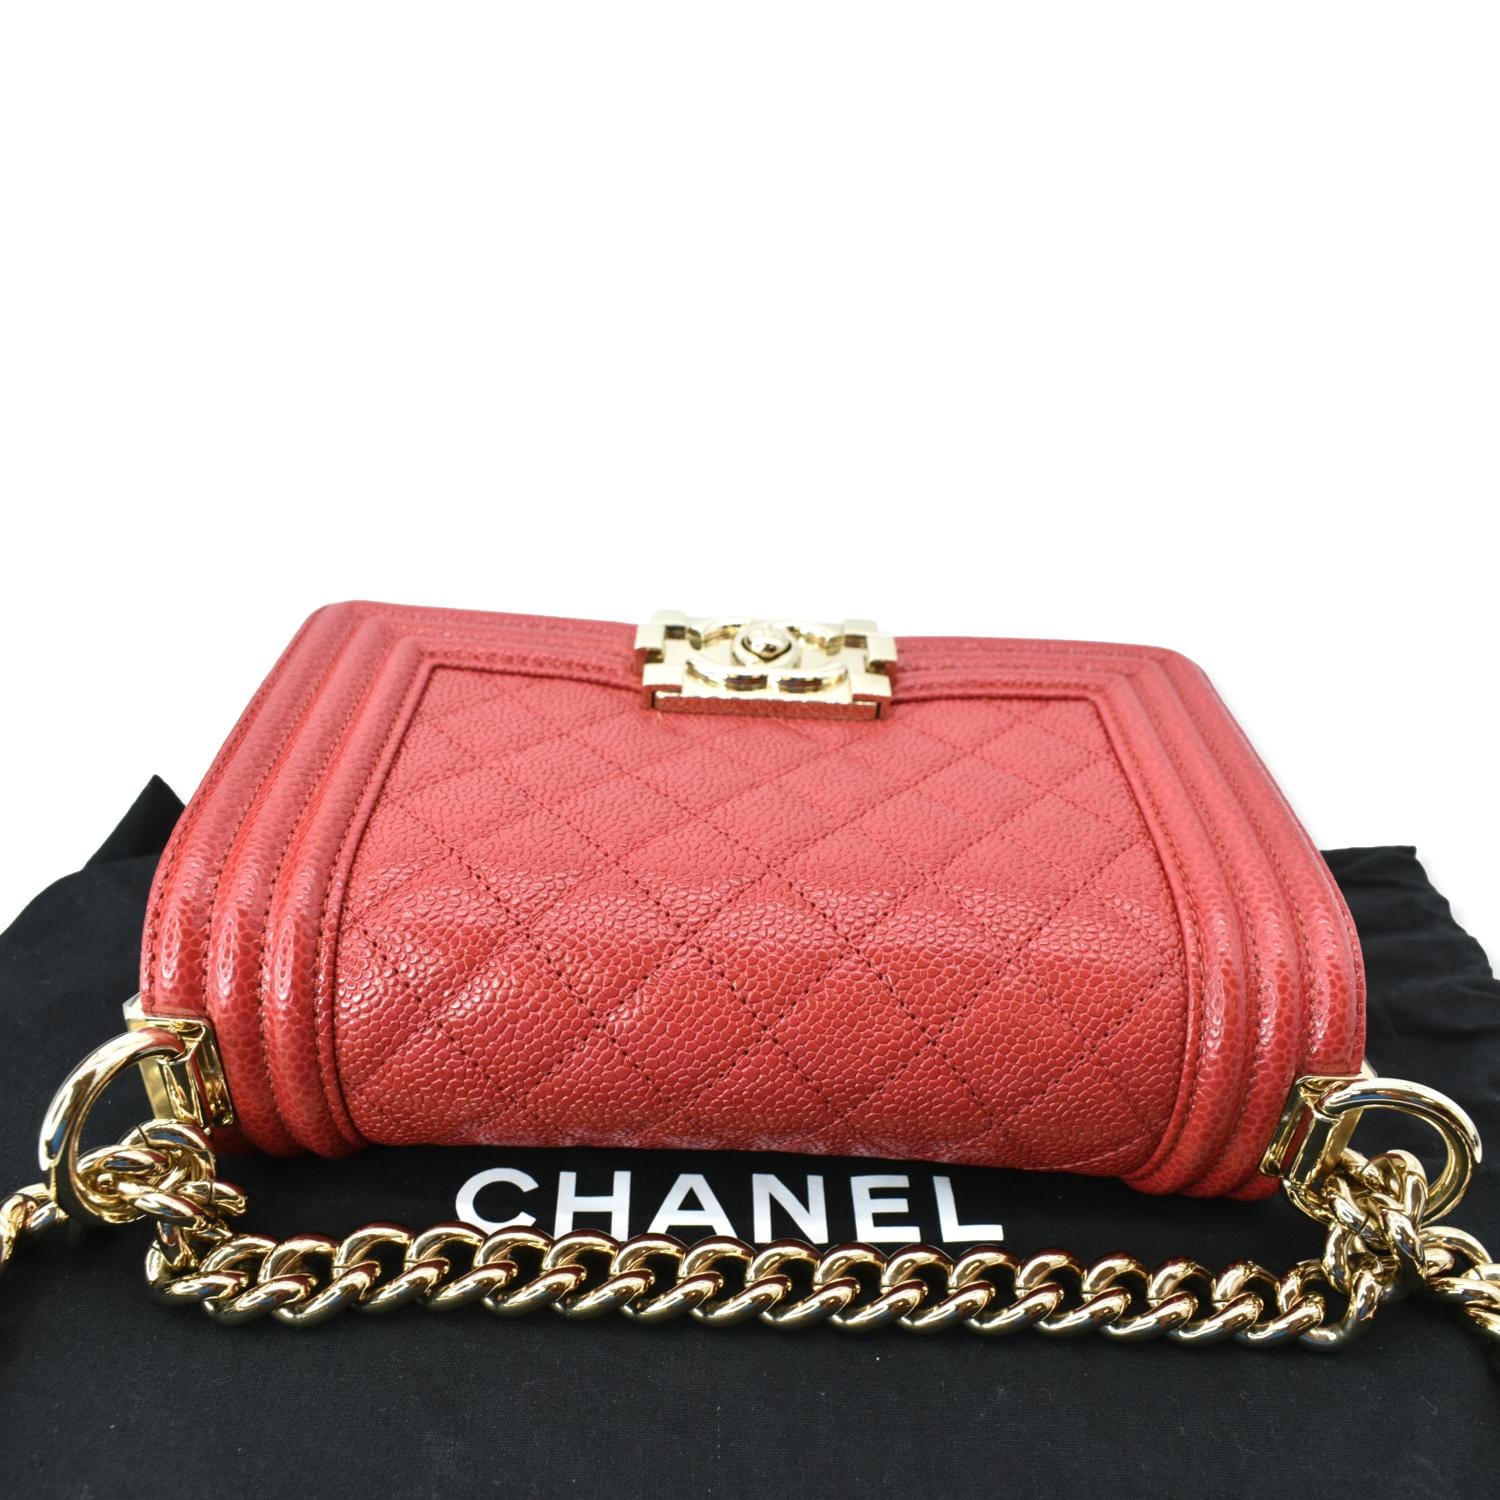 CHANEL Le Boy Small Caviar Leather Shoulder Bag Red